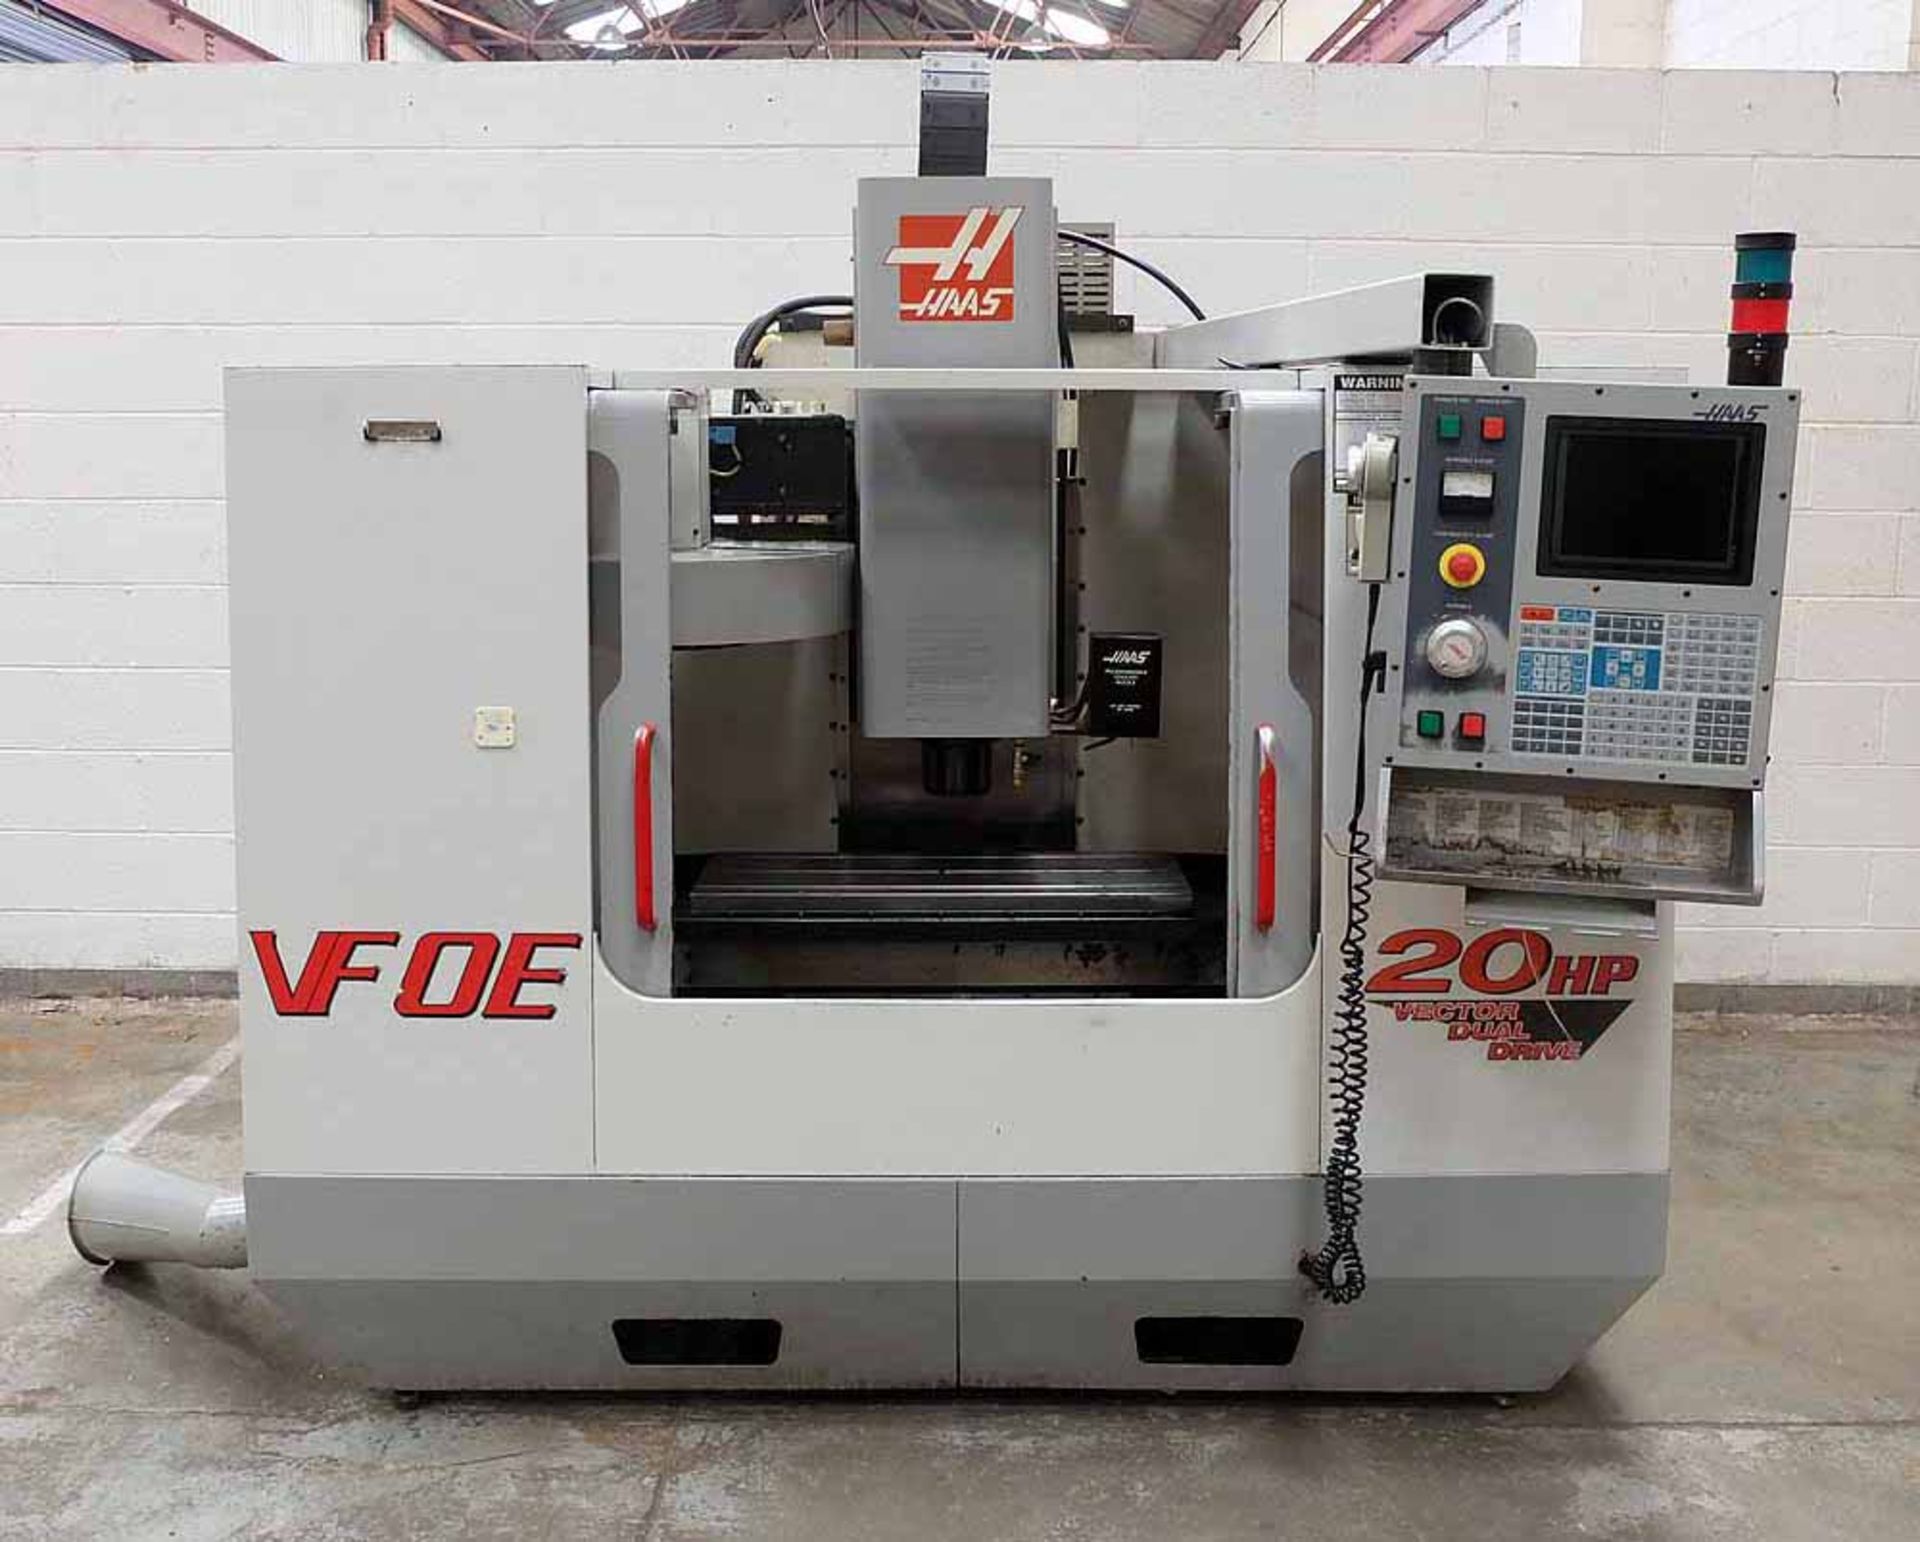 HAAS Model VFOE 3 Axis 20 HP VMC With 4th Axis and Tailstock.